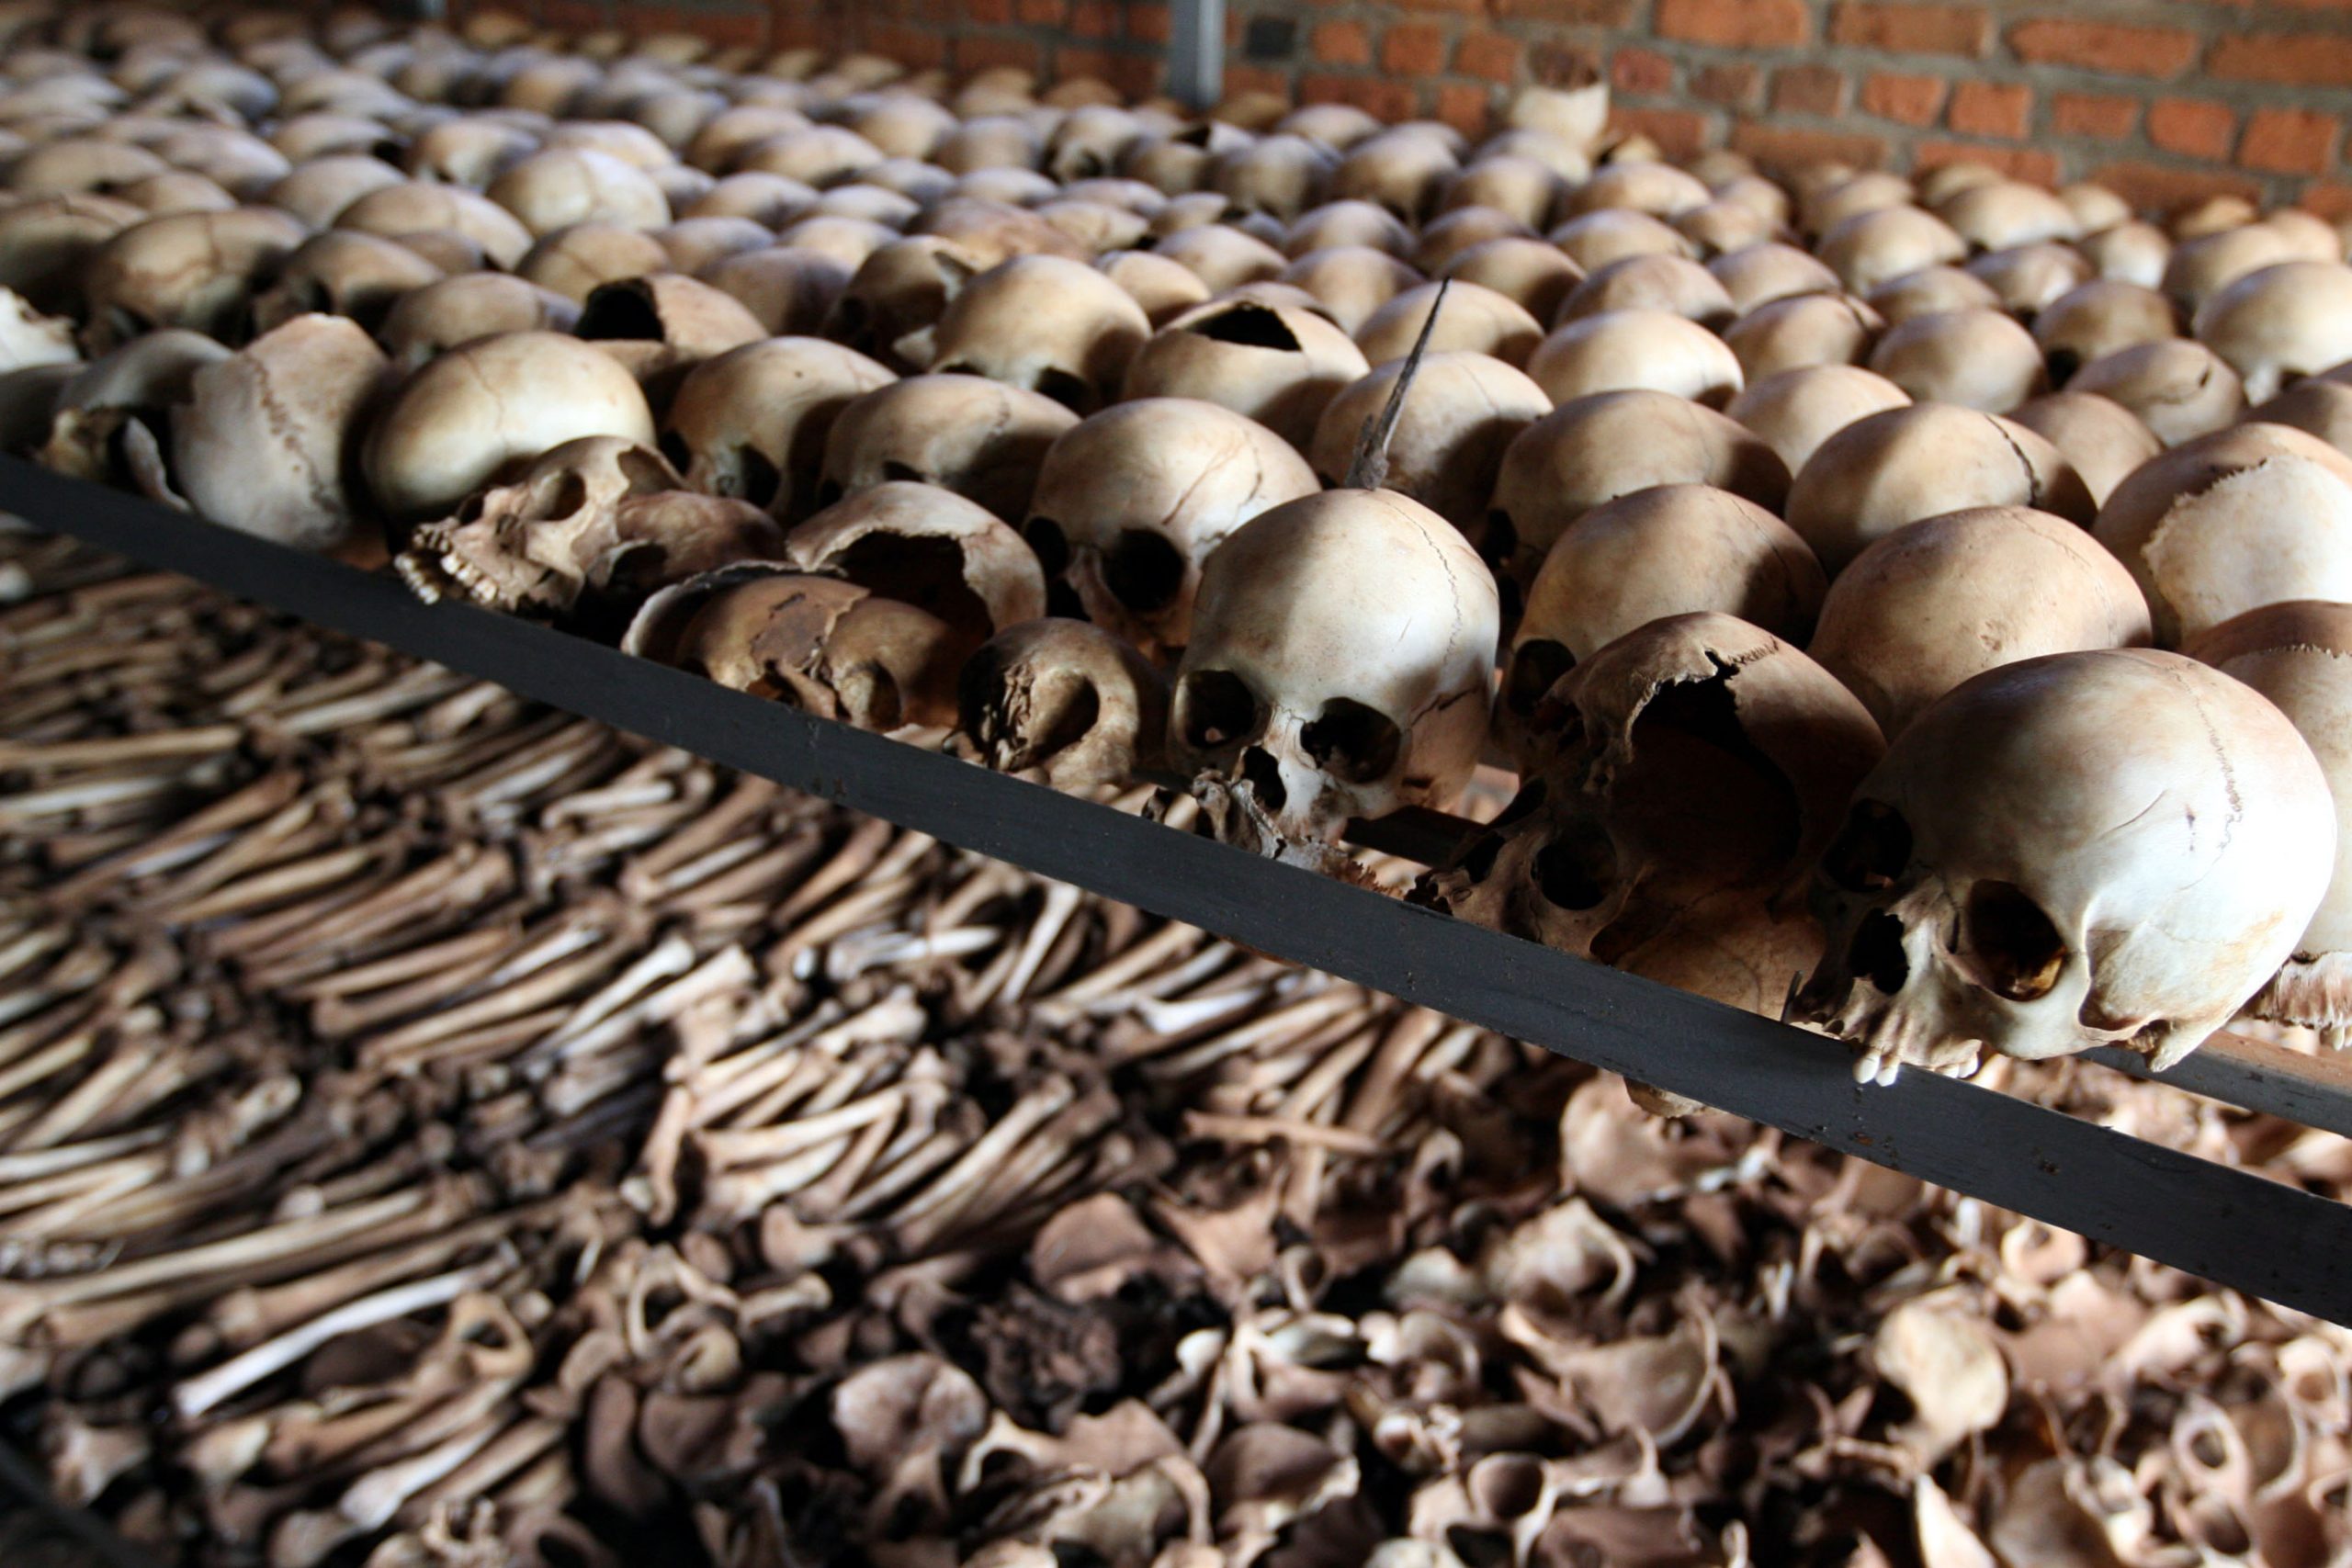 The Rwandan Genocide took place in 1994, which saw a wide-scale ethnic cleansing of around 6,50,000 Tutsi-origin Rwandans 